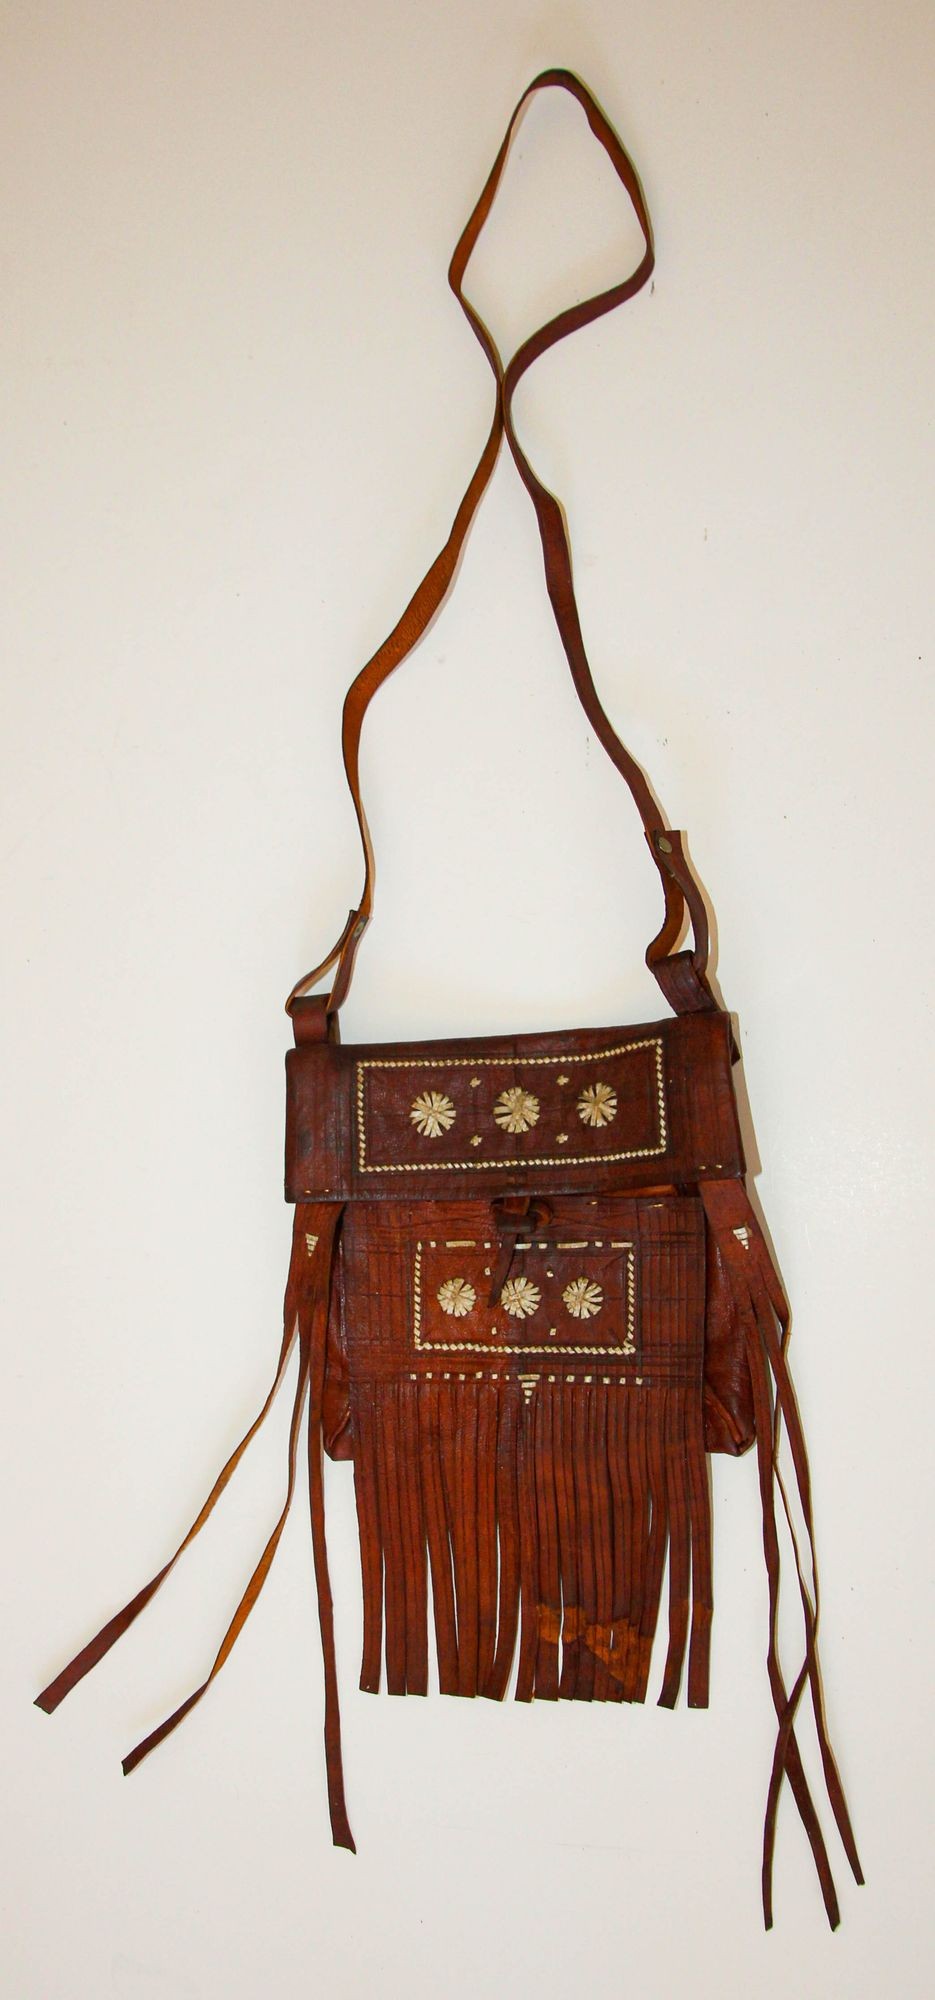 antique tooled leather purse, early 1900s vintage Jemco handbag w/  aesthetic design